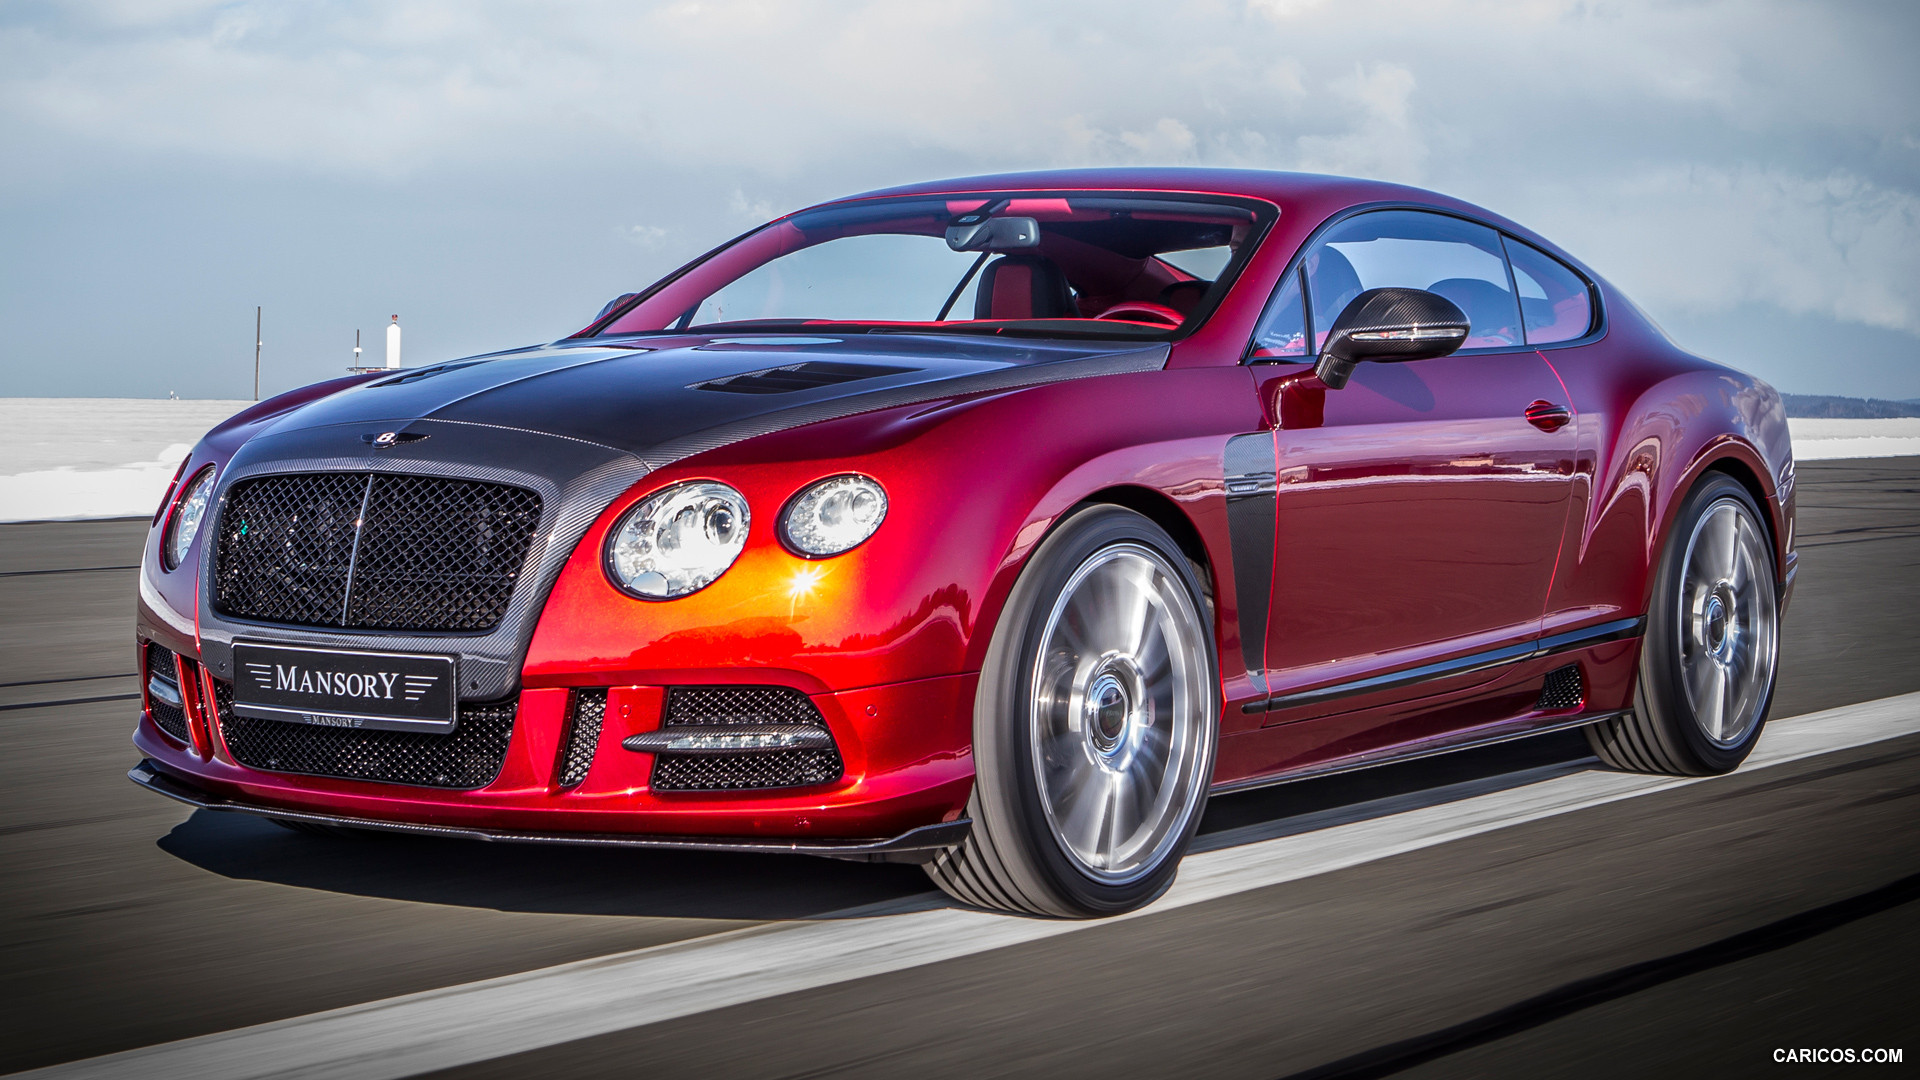 2013 Mansory Sanguis based on Bentley Continental GT  - Front, #2 of 7